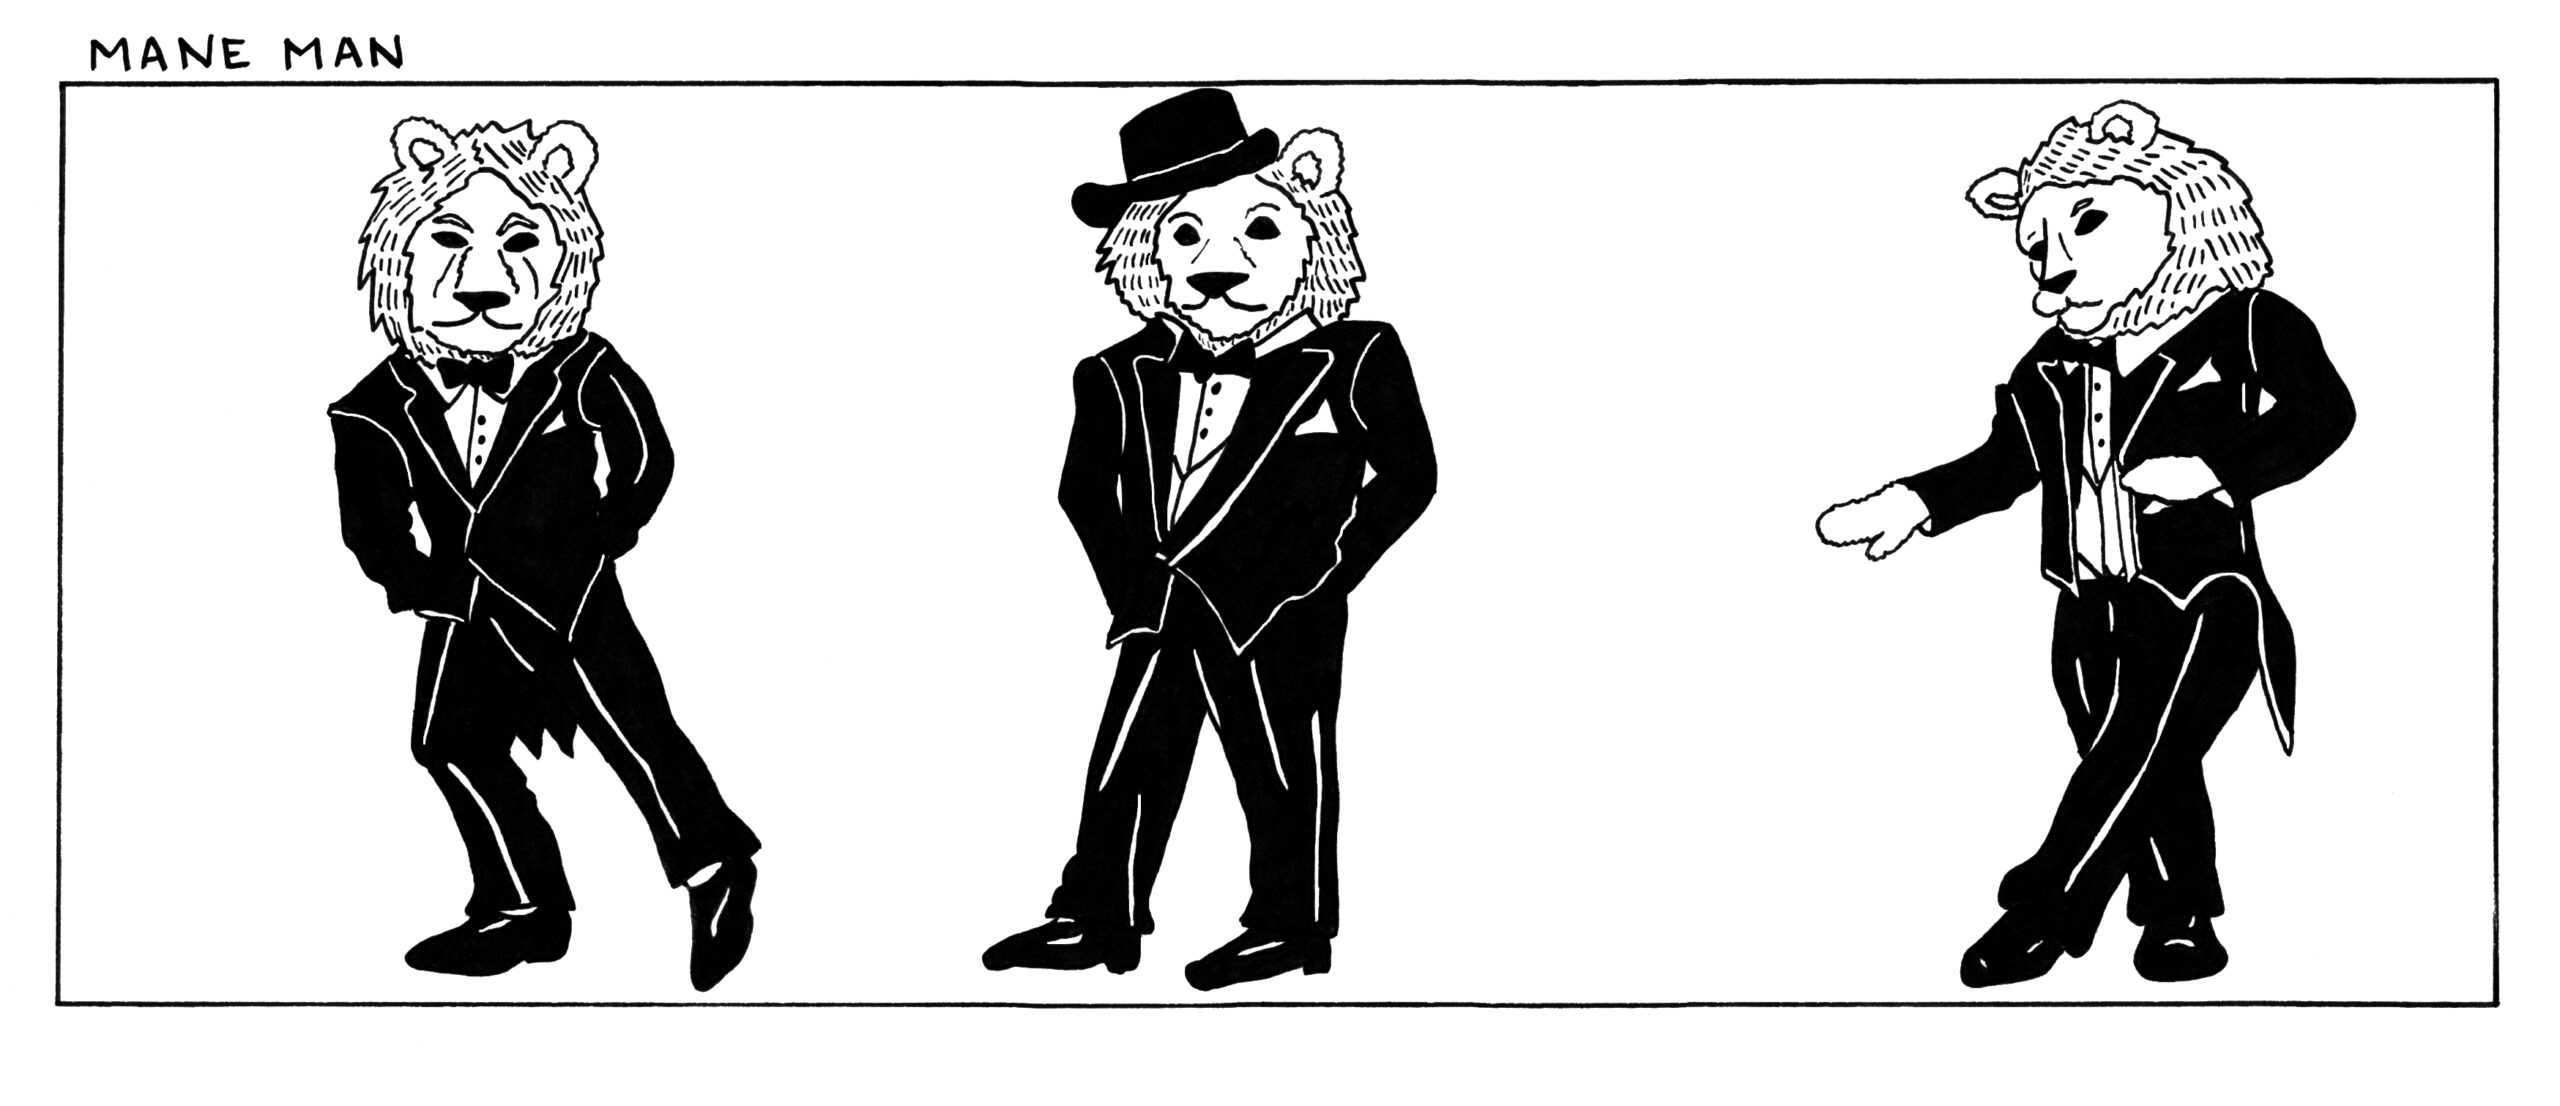 The dapper anthropomorphic lion of your dreams.